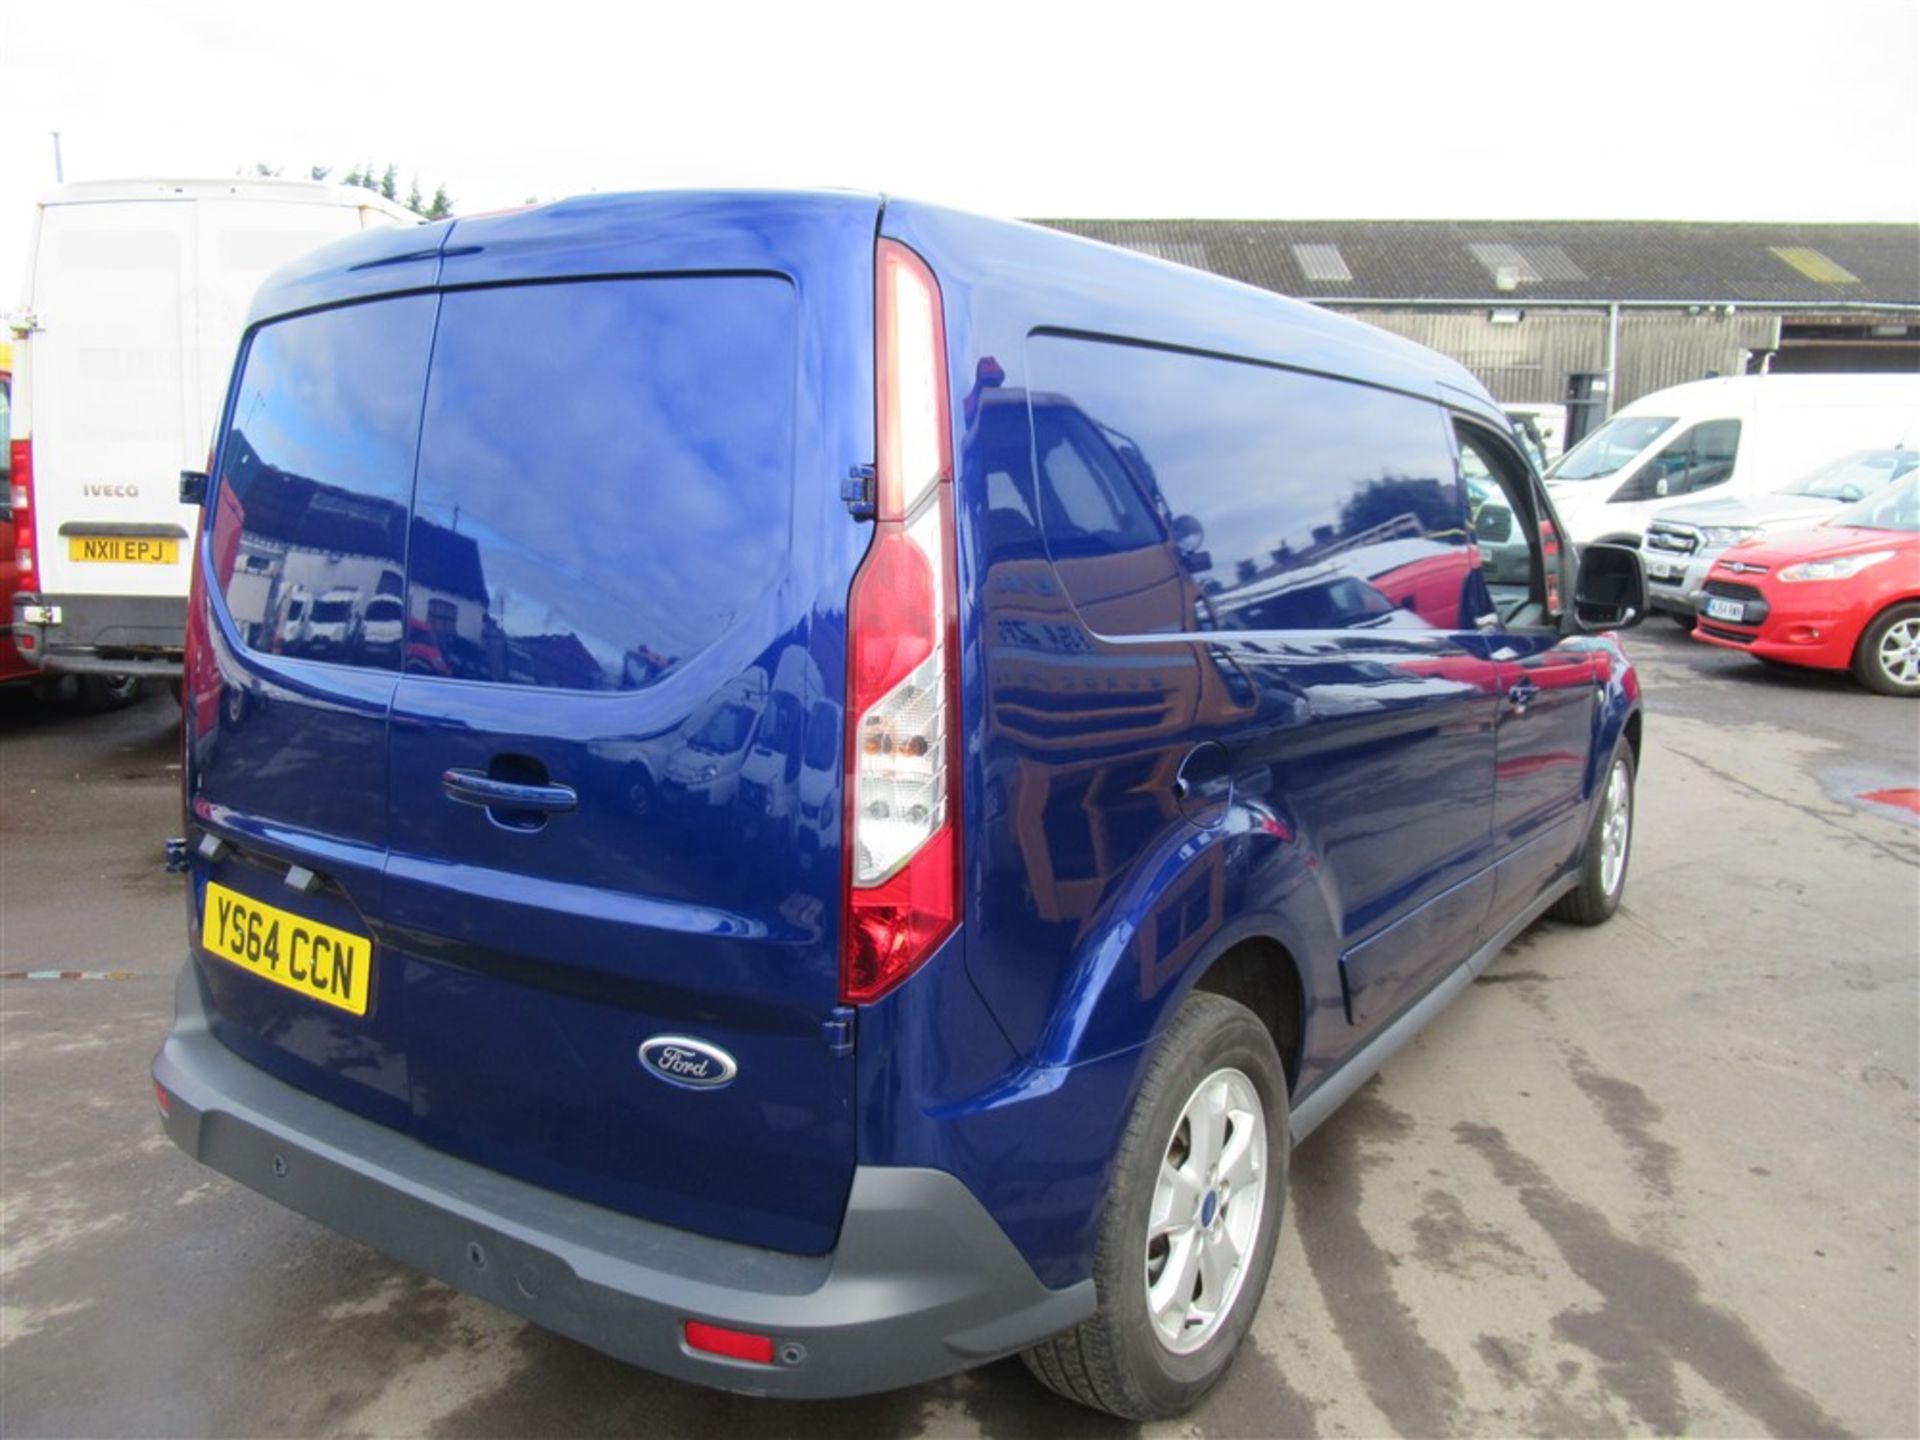 64 reg FORD TRANSIT CONNECT 240 LIMITED, 1ST REG 12/14, 128144M WARRANTED, V5 HERE, 1 OWNER FROM NEW - Image 4 of 7